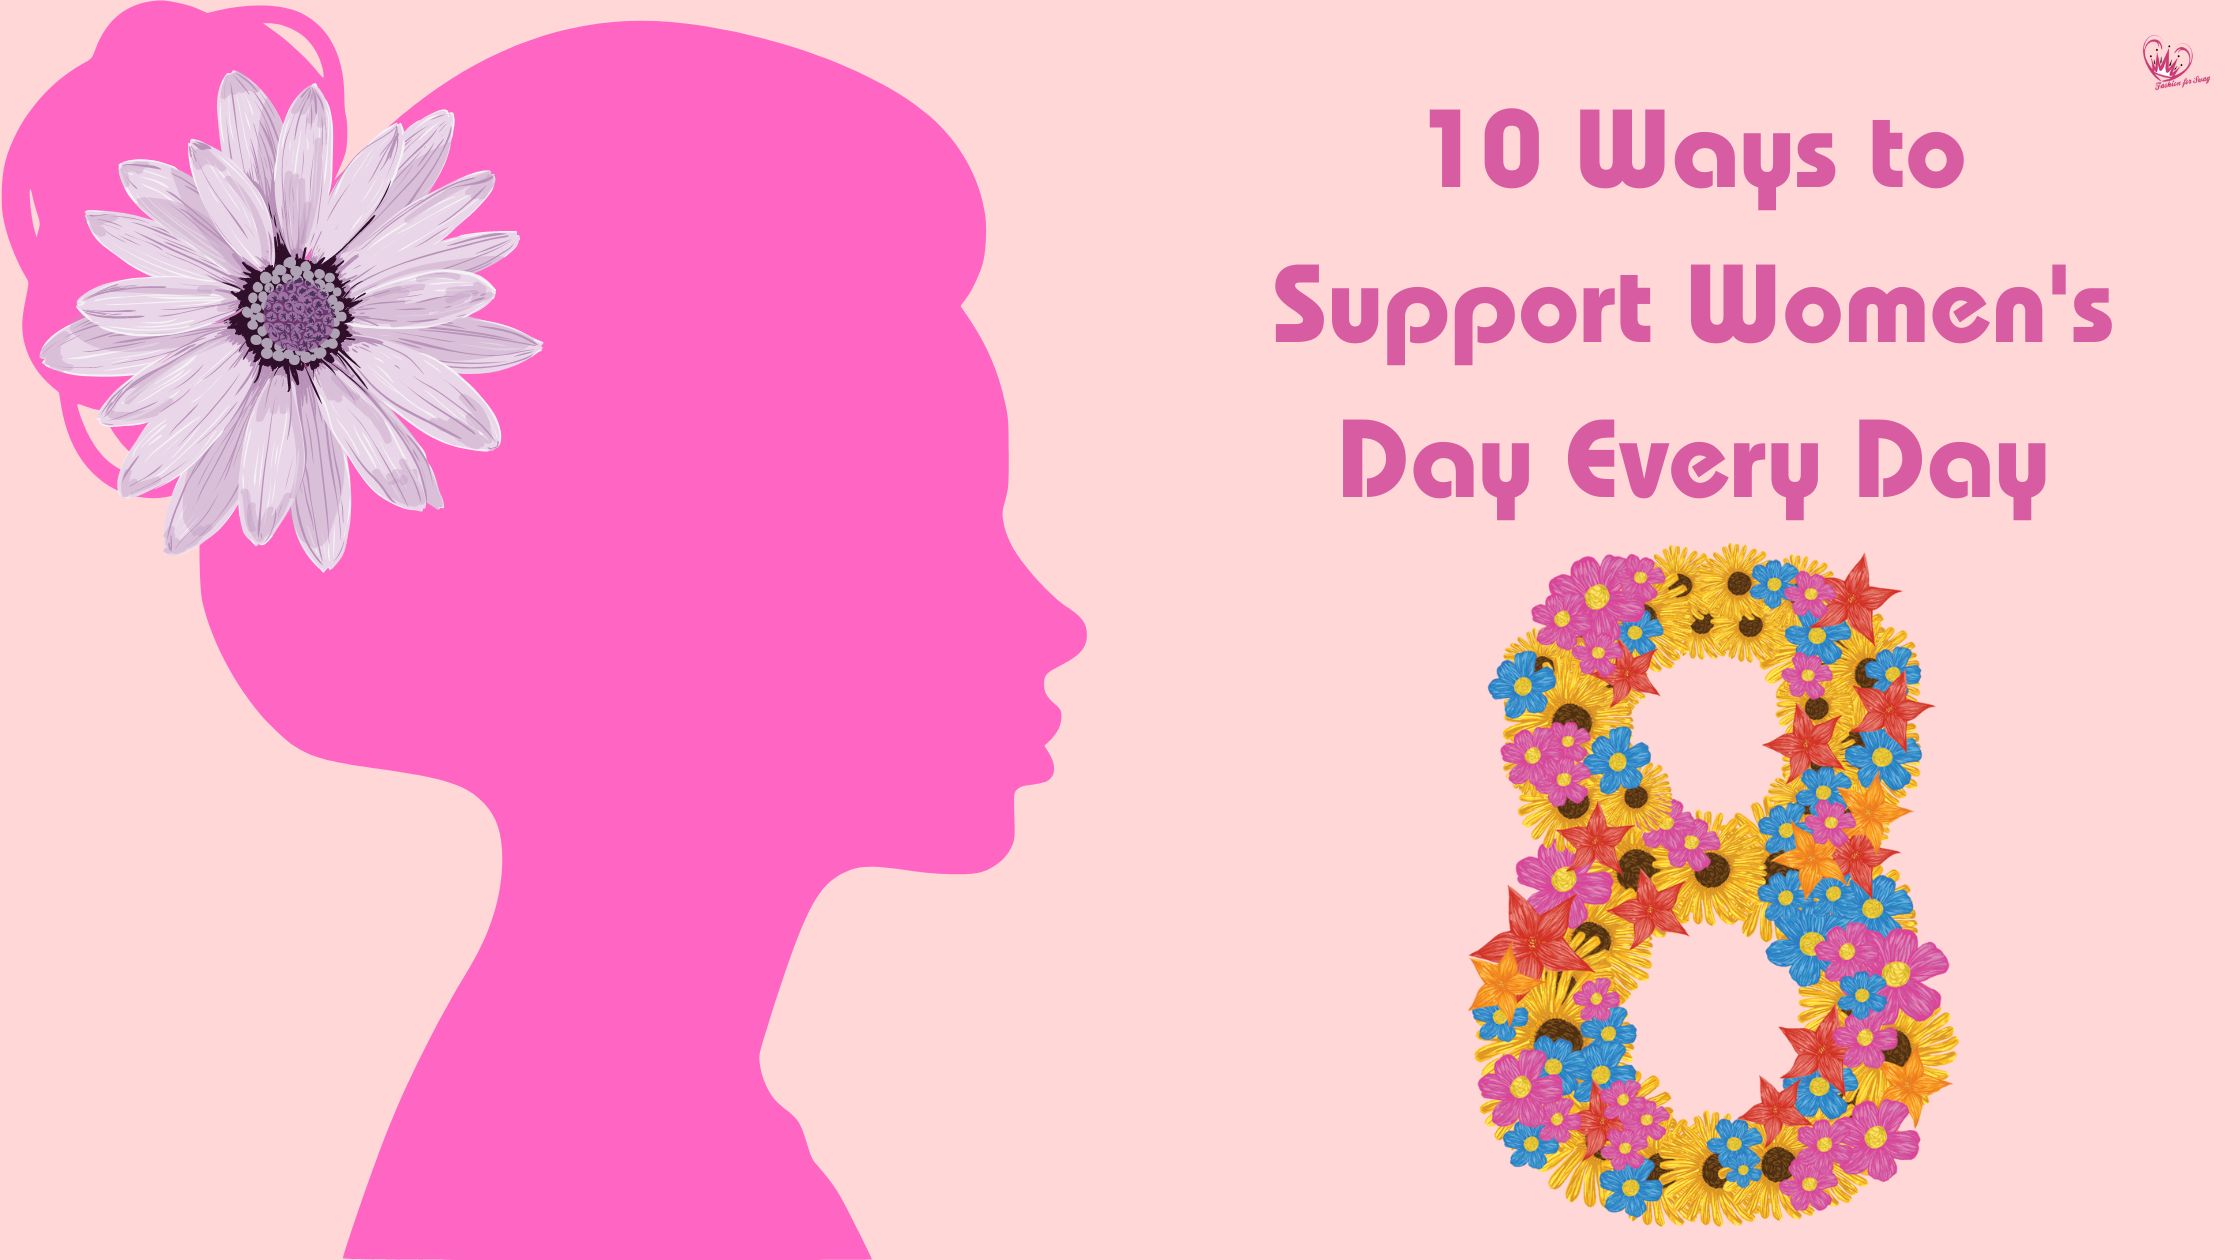 10 Ways to Support Women’s Day Every Day